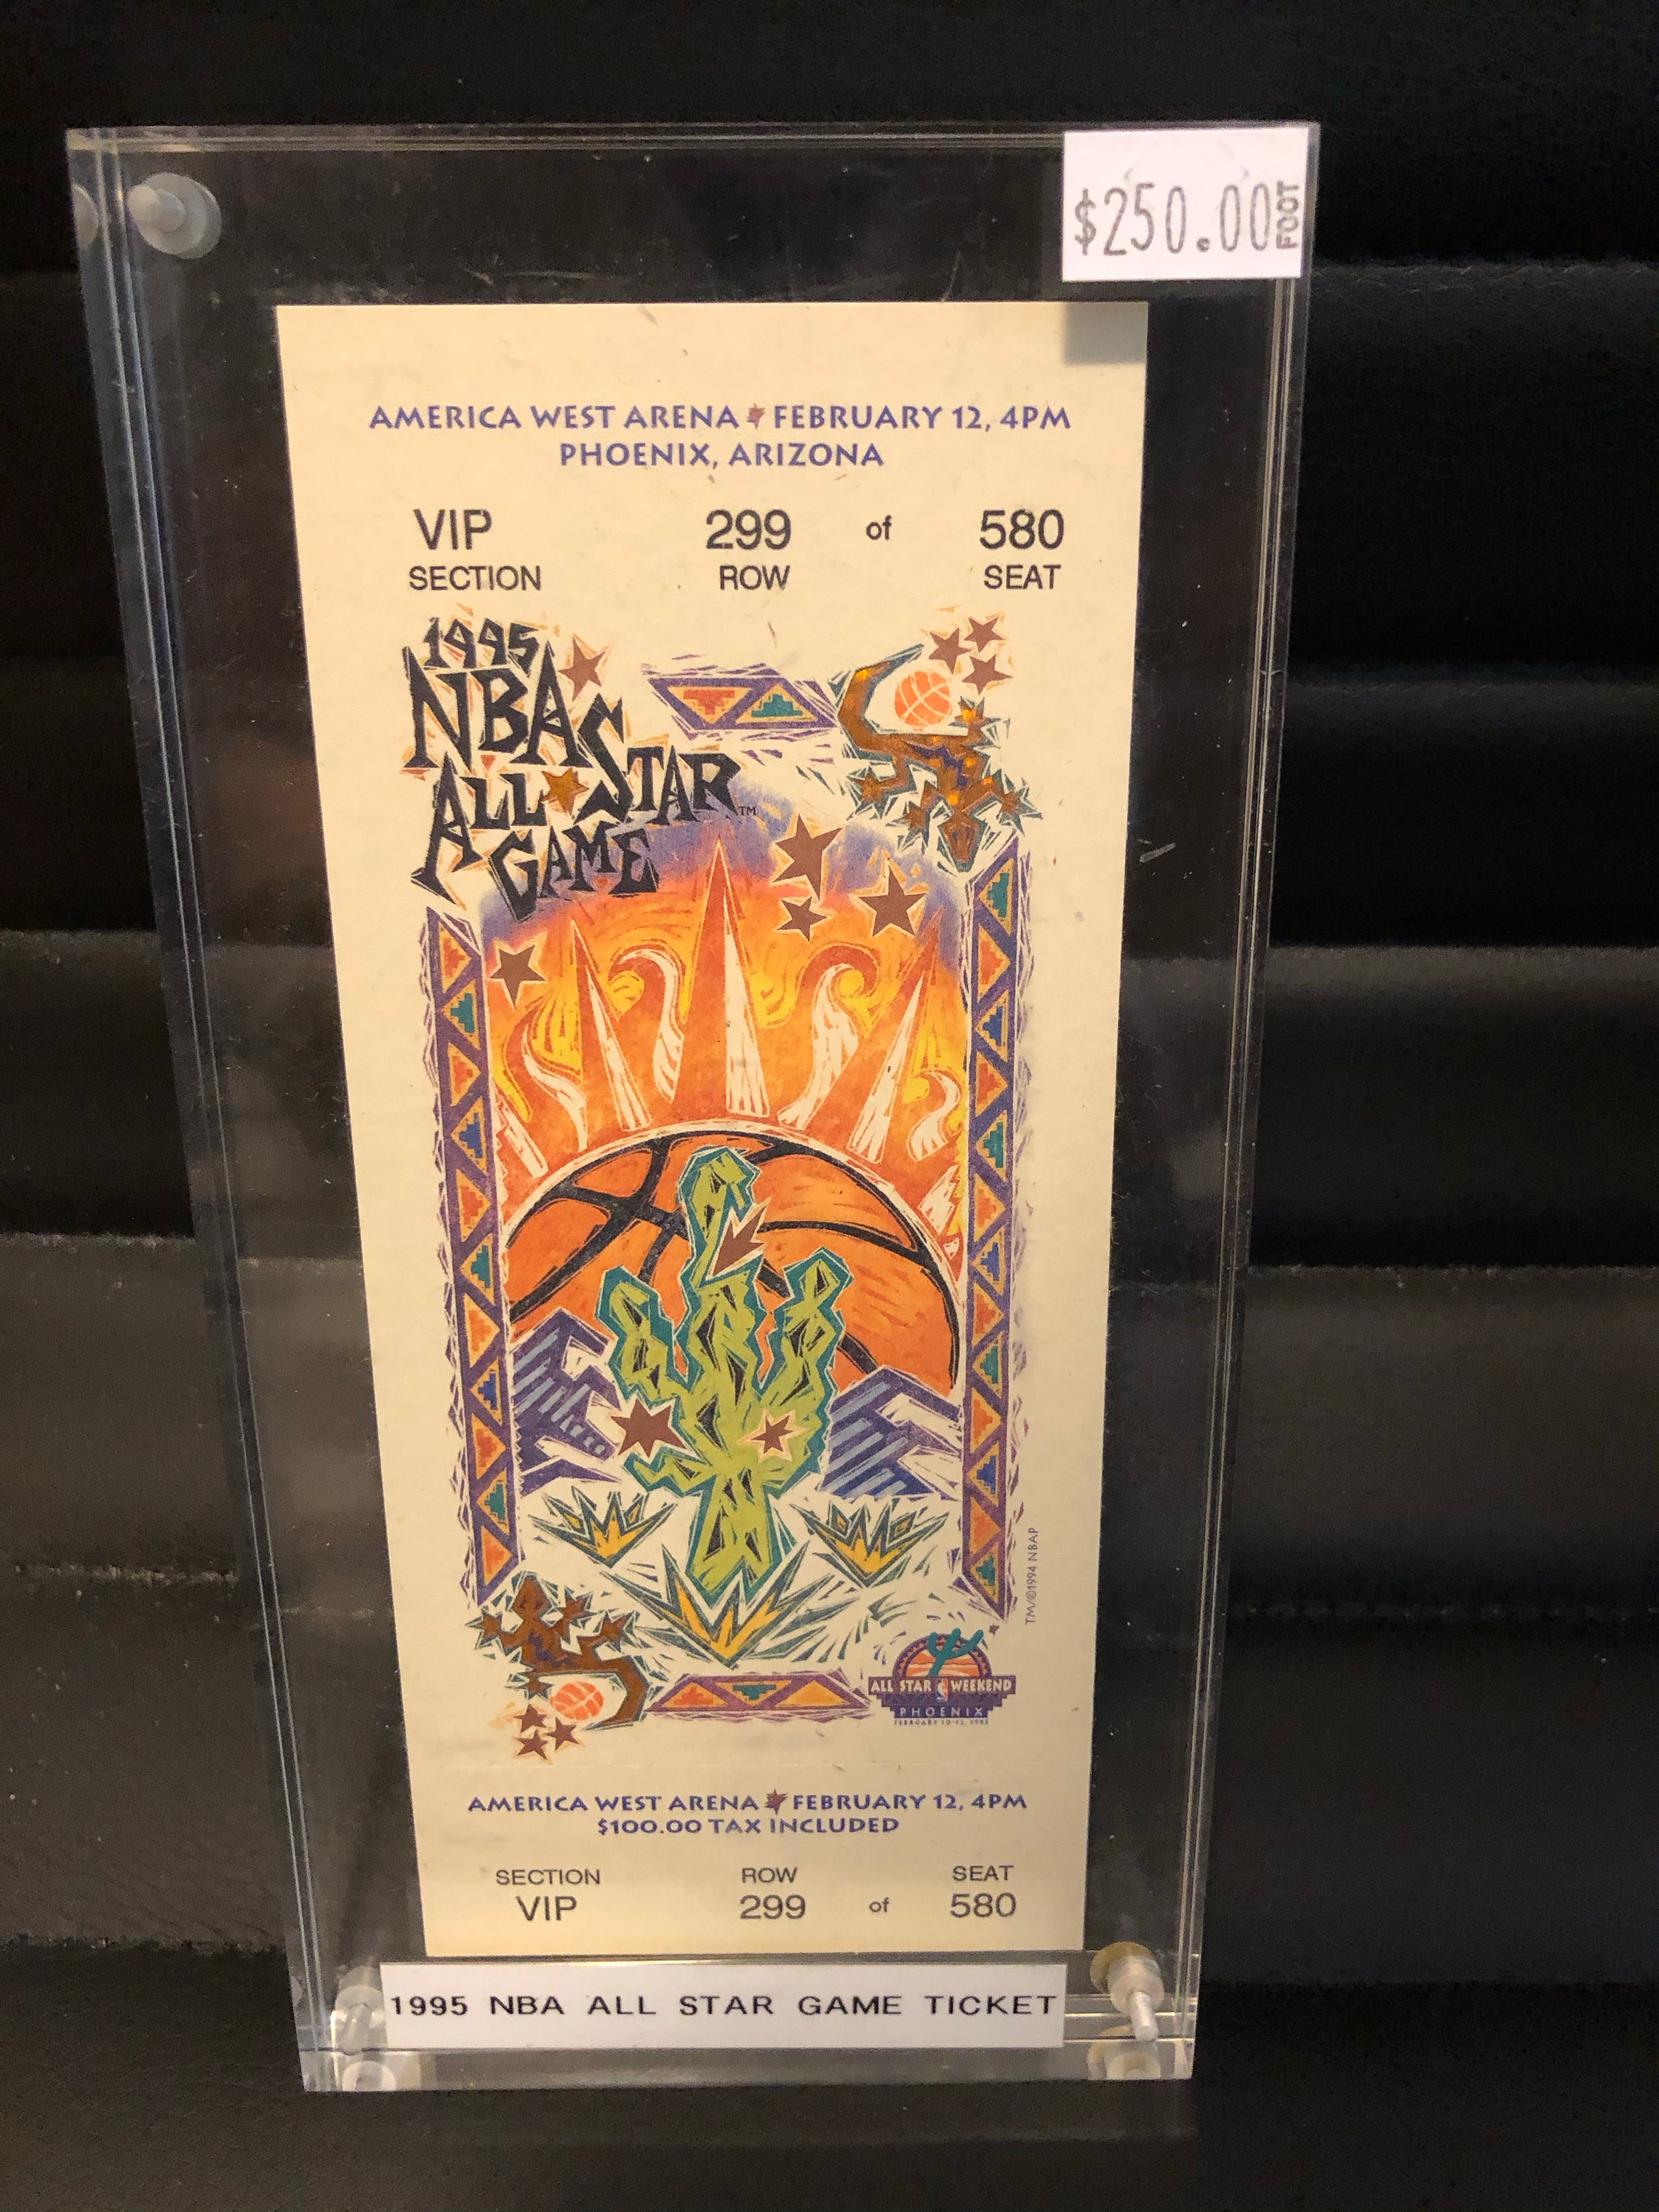 1995 NBA All Star game ticket in lucite holder